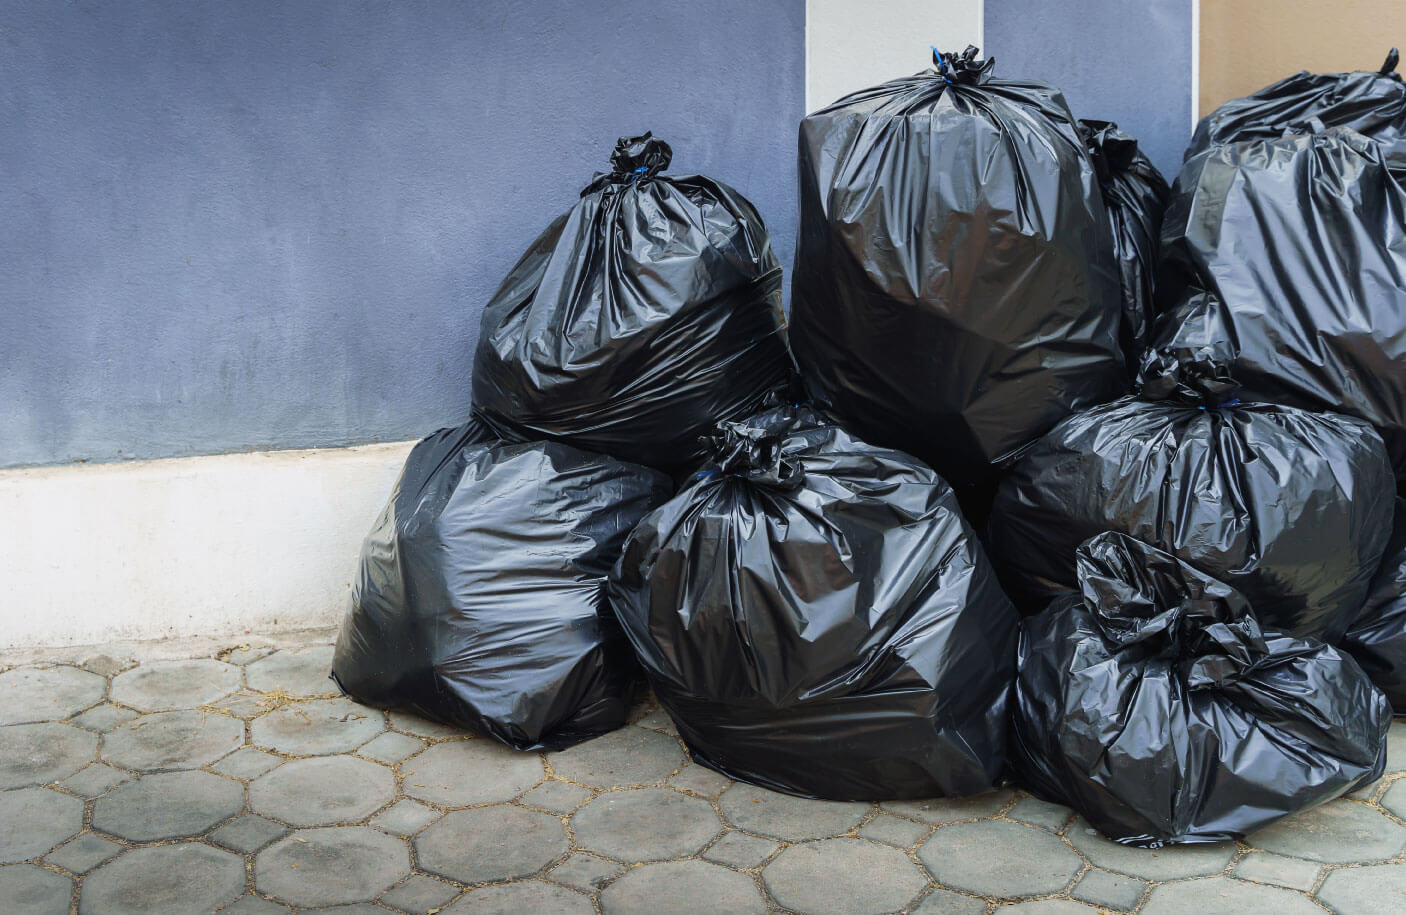 Extra Large Trash Bags: How We Can Help